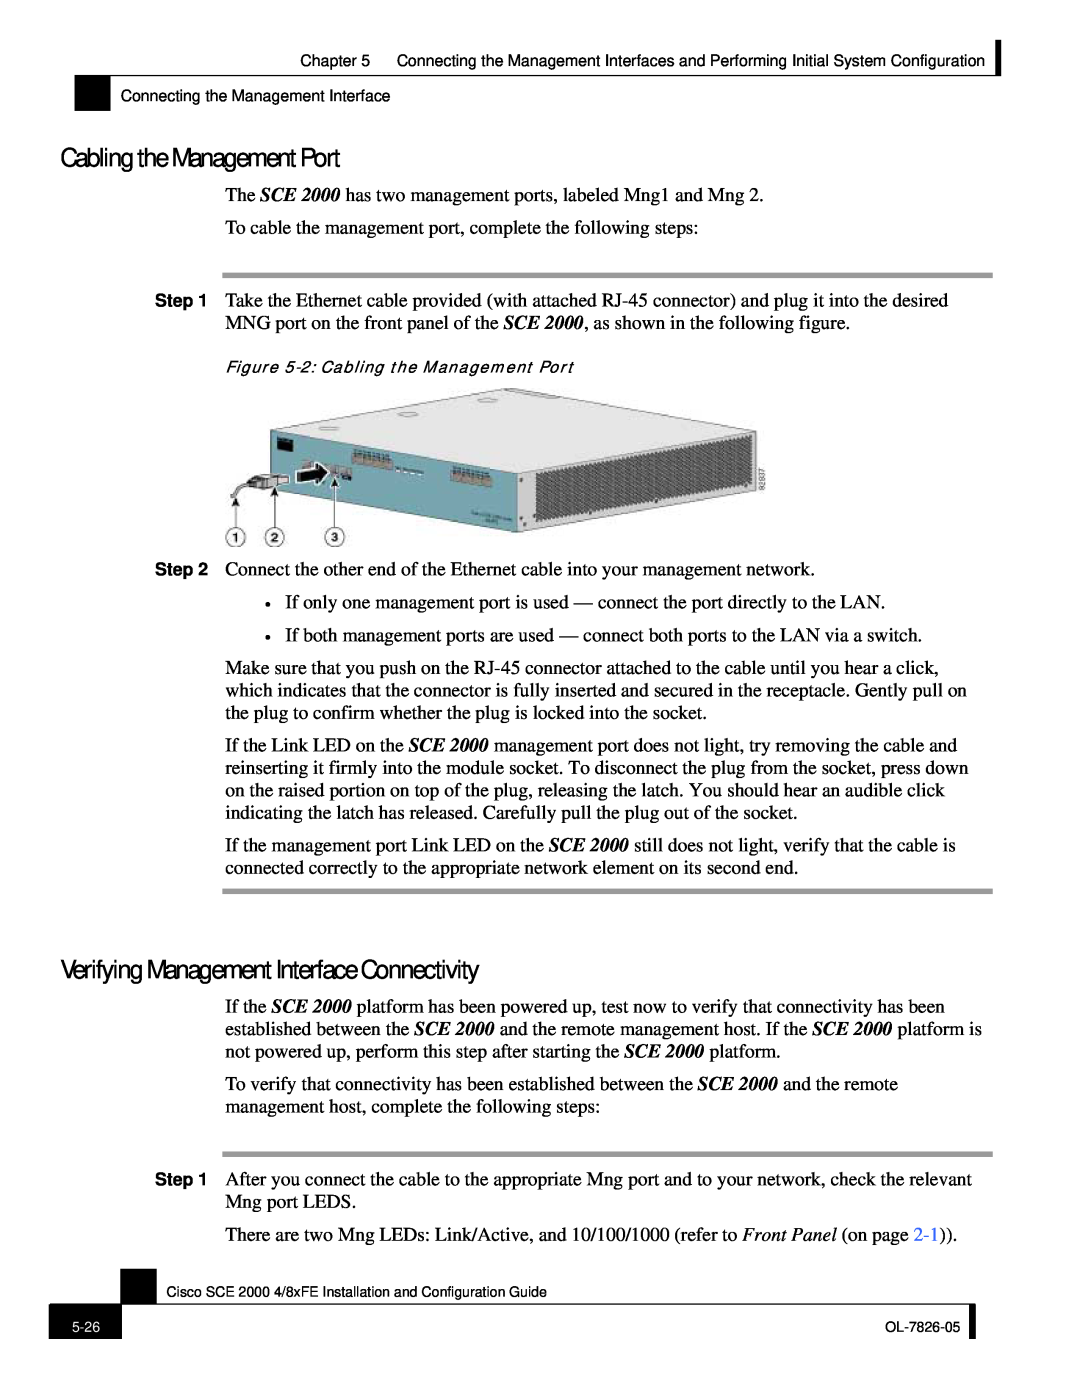 Cisco Systems SCE 2000 4/8xFE manual Cabling the Management Port, Verifying Management Interface Connectivity 